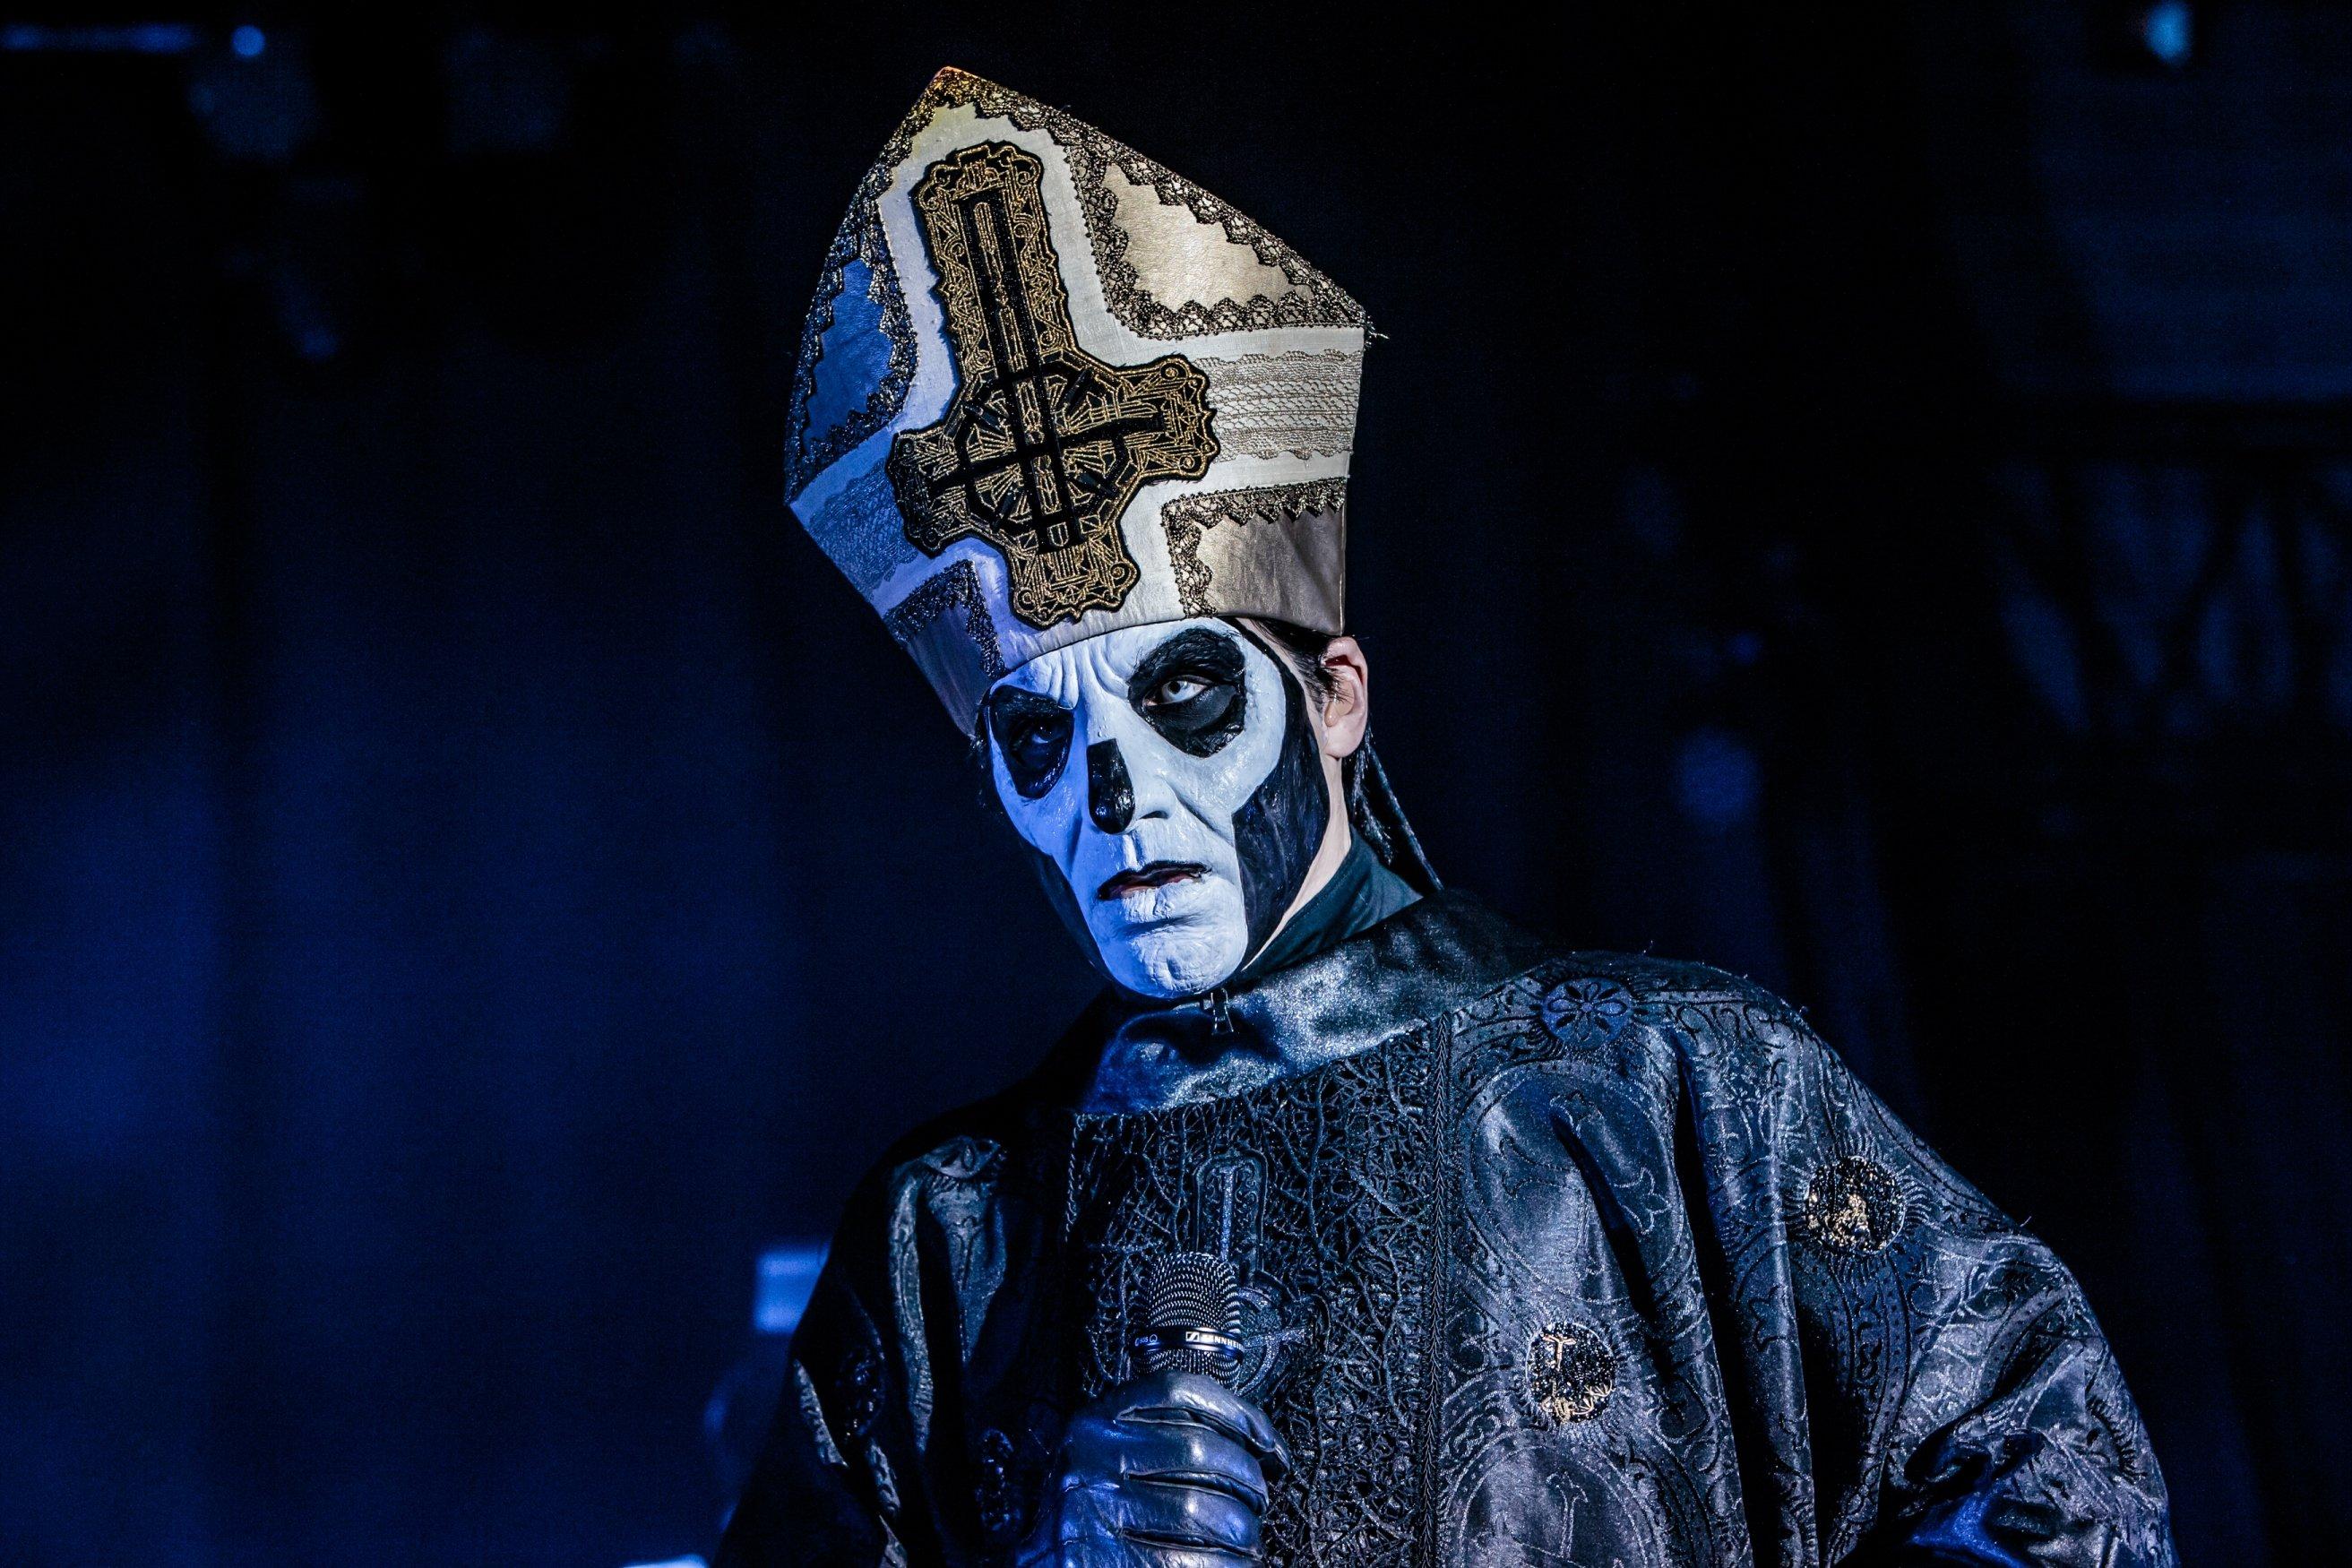 Ghost performs live in 2017